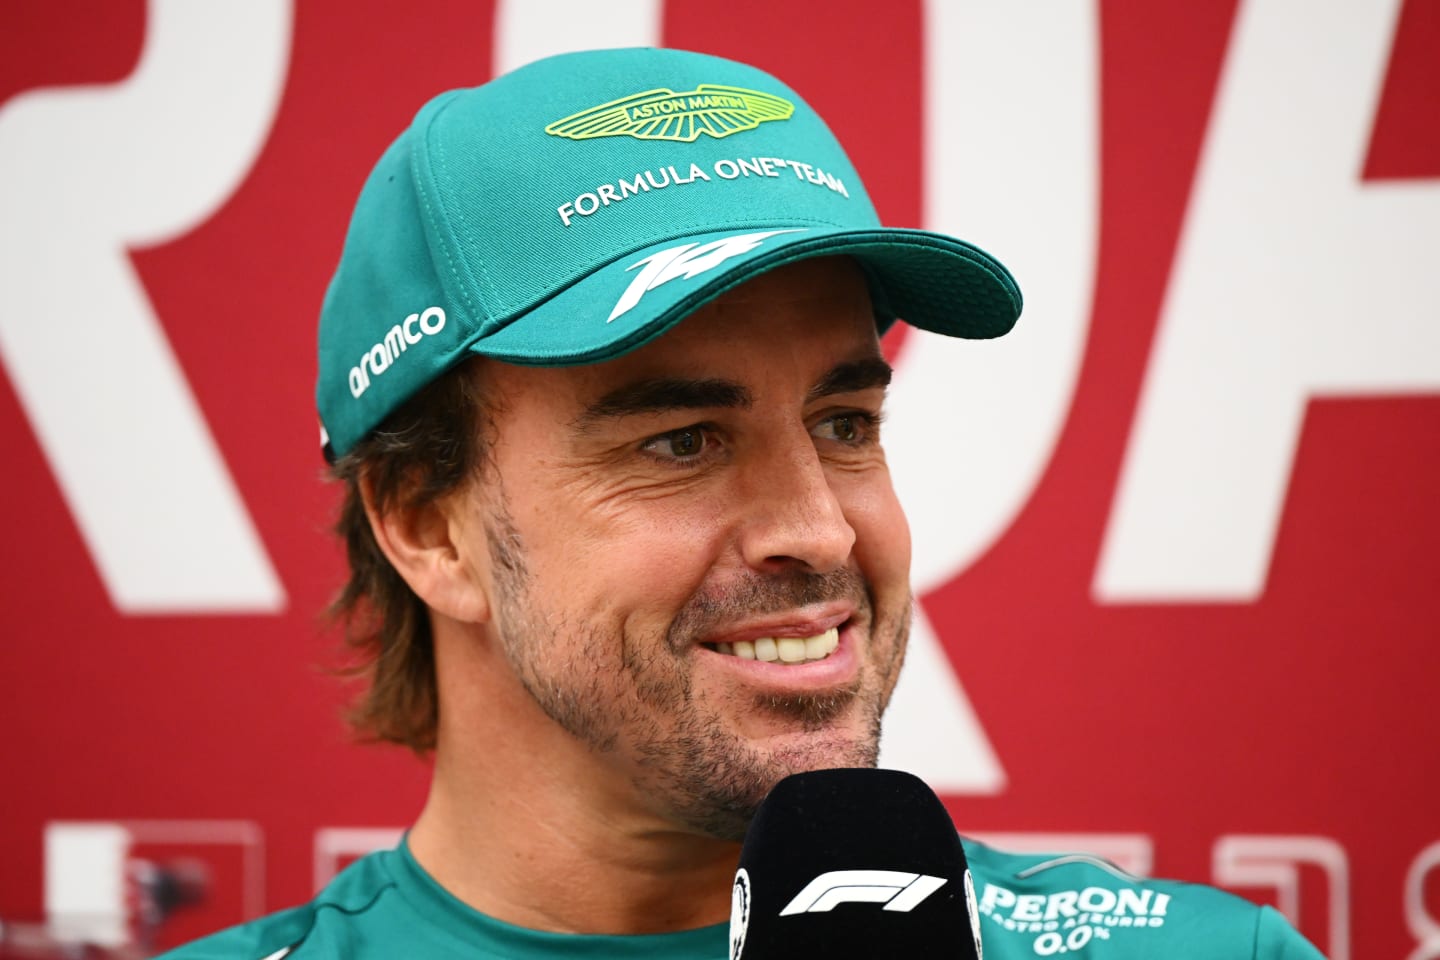 LUSAIL CITY, QATAR - OCTOBER 05: Fernando Alonso of Spain and Aston Martin F1 Team attends the Drivers Press Conference during previews ahead of the F1 Grand Prix of Qatar at Lusail International Circuit on October 05, 2023 in Lusail City, Qatar. (Photo by Clive Mason/Getty Images)